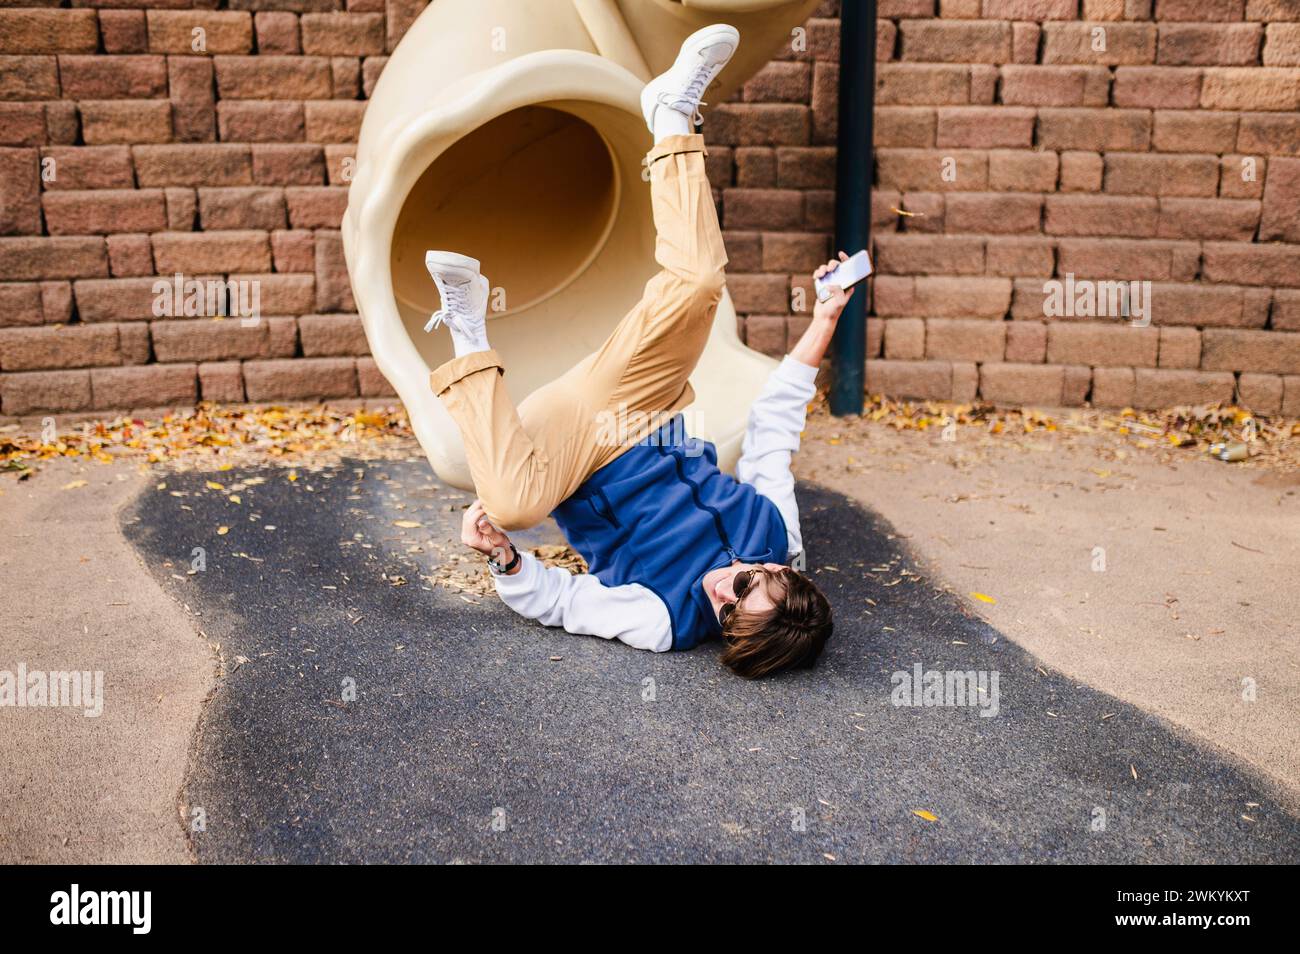 Teenager playfully falling from slide Stock Photo